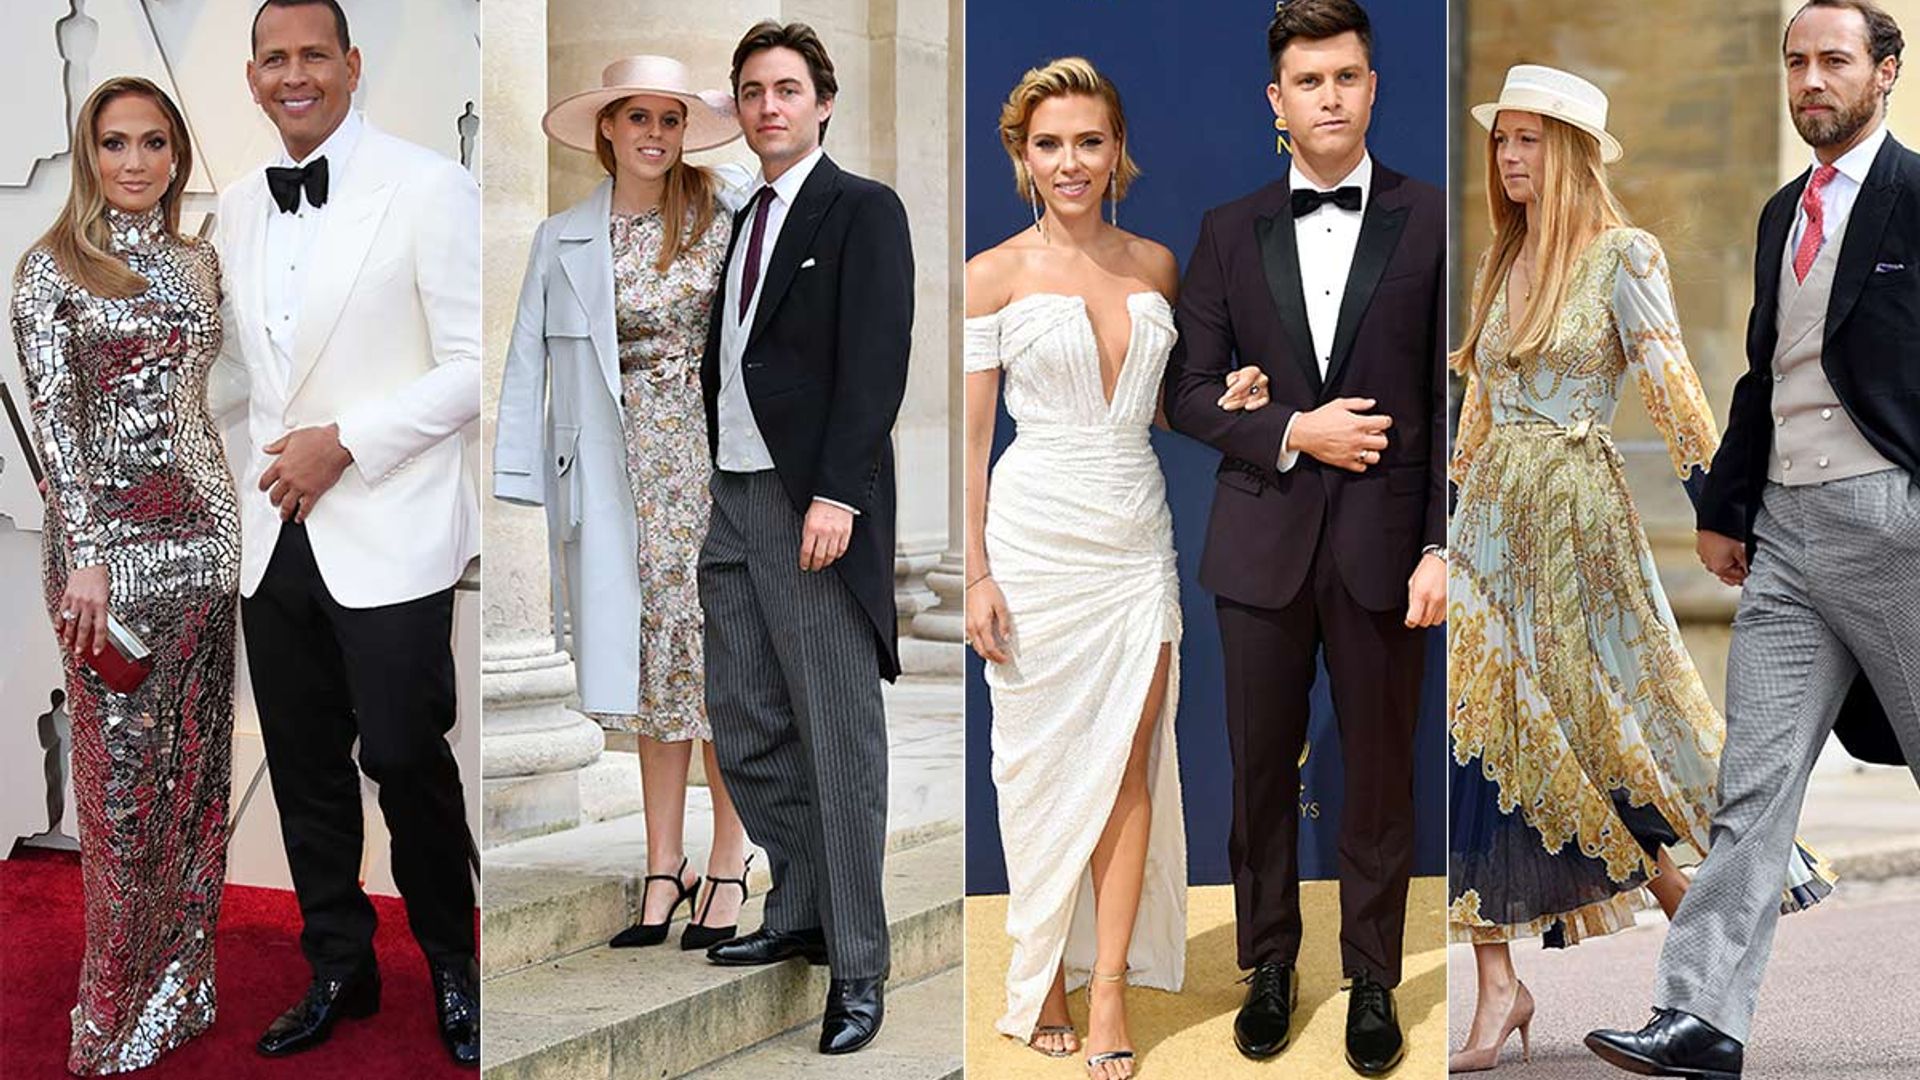 Princess Beatrice Katy Perry J Lo And 11 More Celebrity Weddings To Look Forward To In 2020